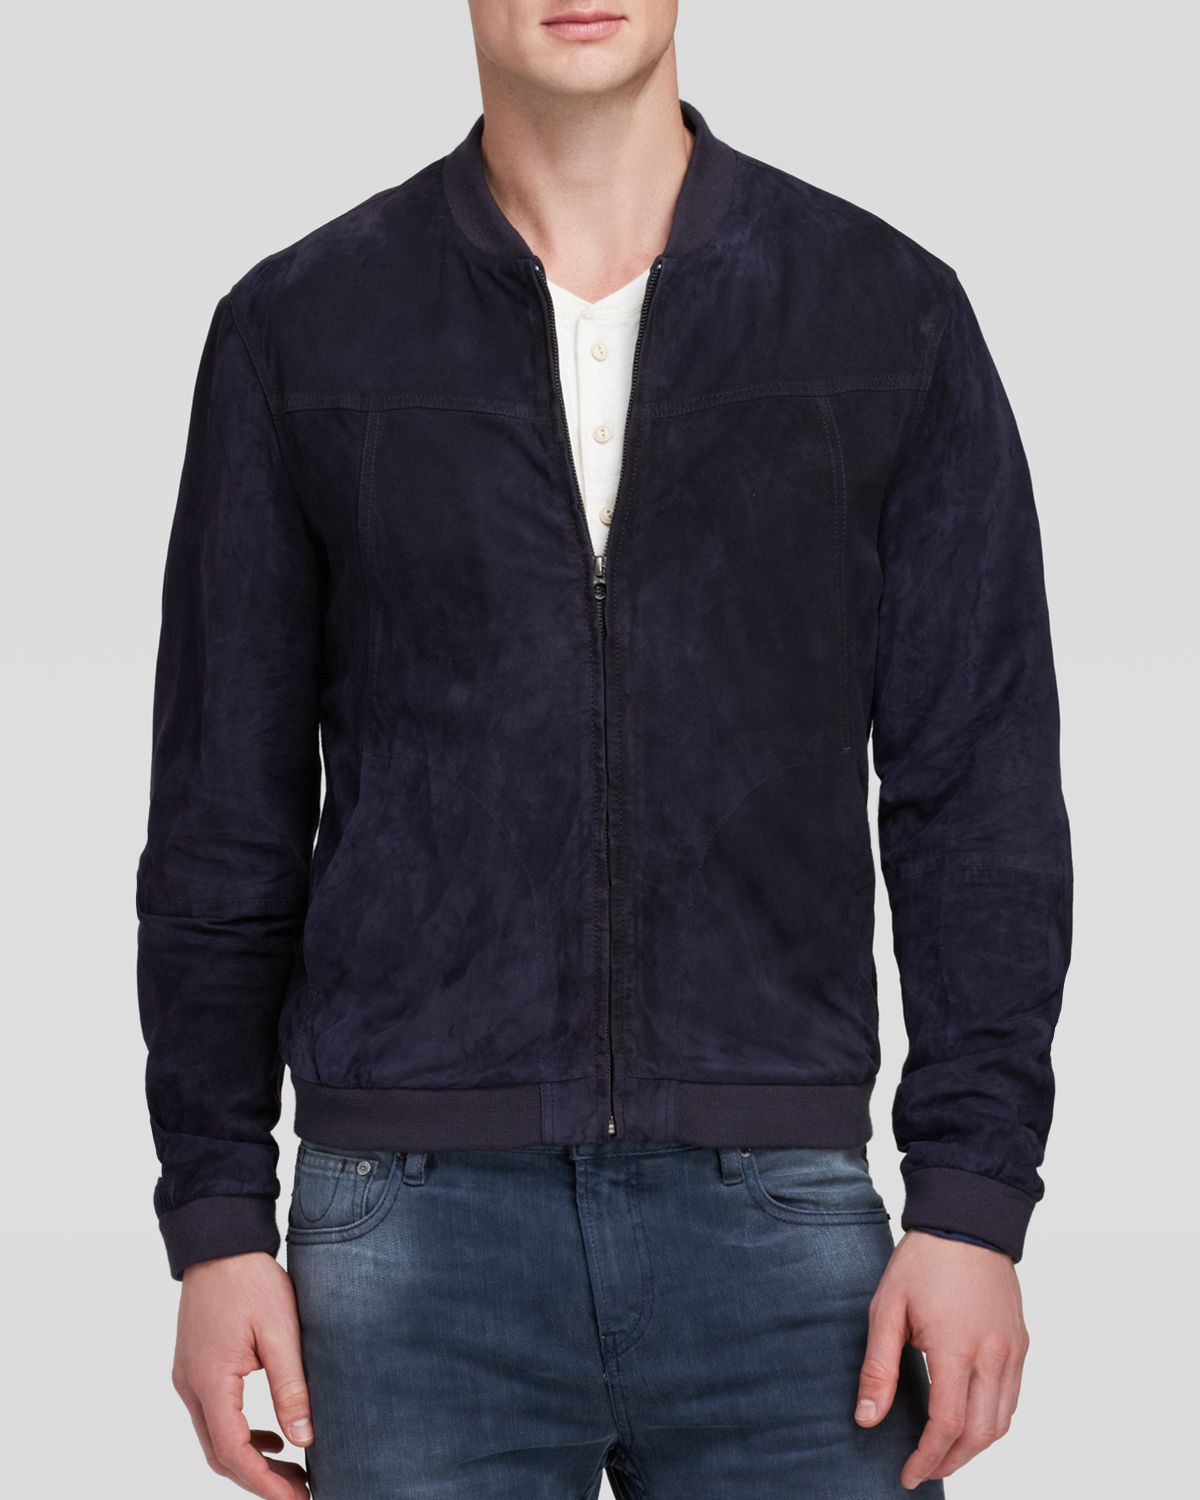 Scotch & Soda Slim Fit Suede Bomber Jacket in Navy (Blue) for Men - Lyst